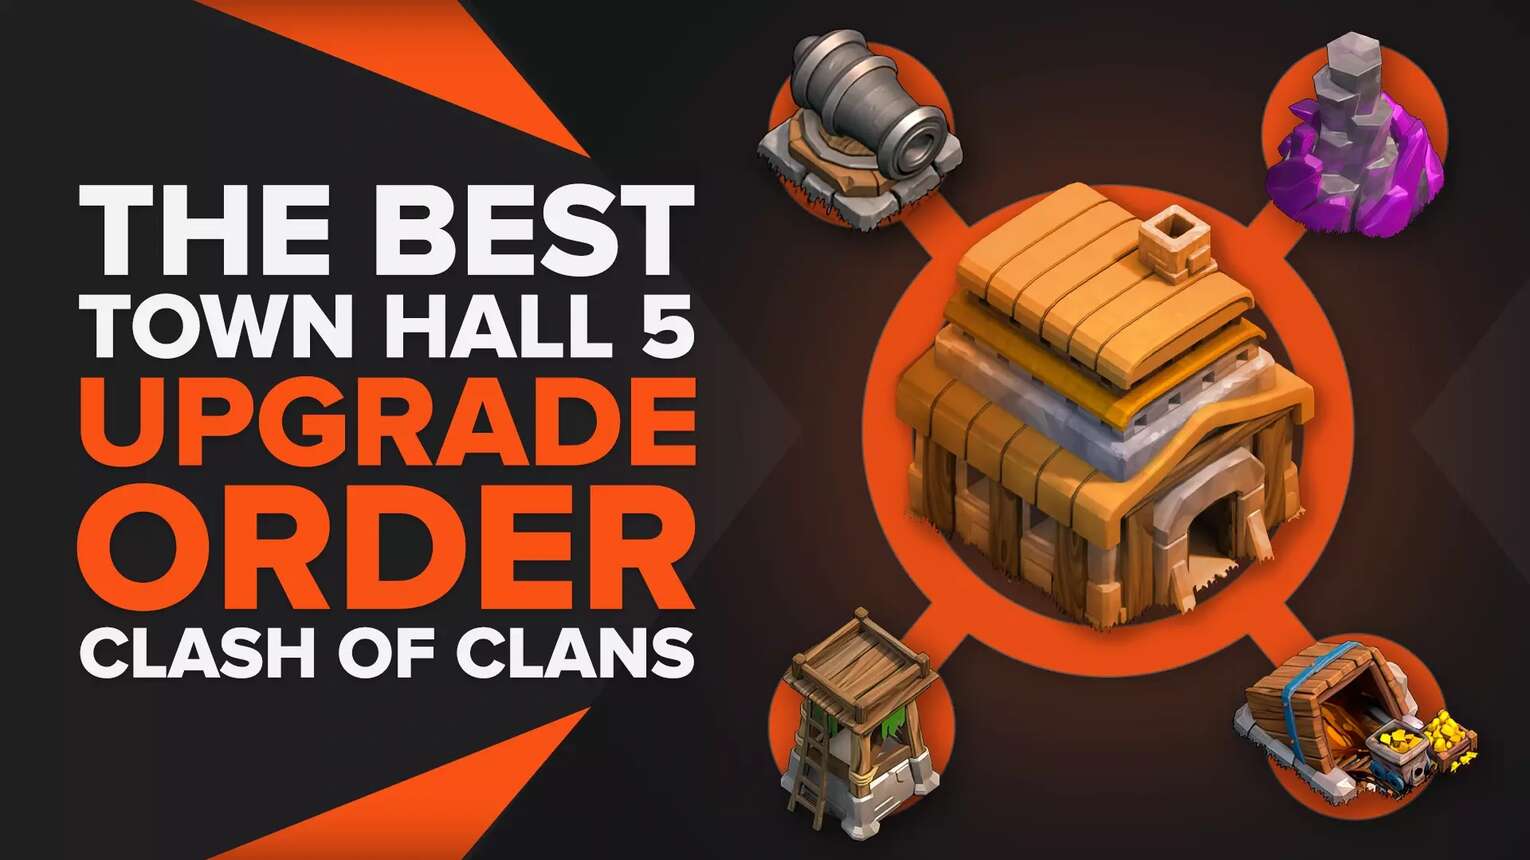 See The Best Town Hall 5 Upgrade Order in Clash of Clans!